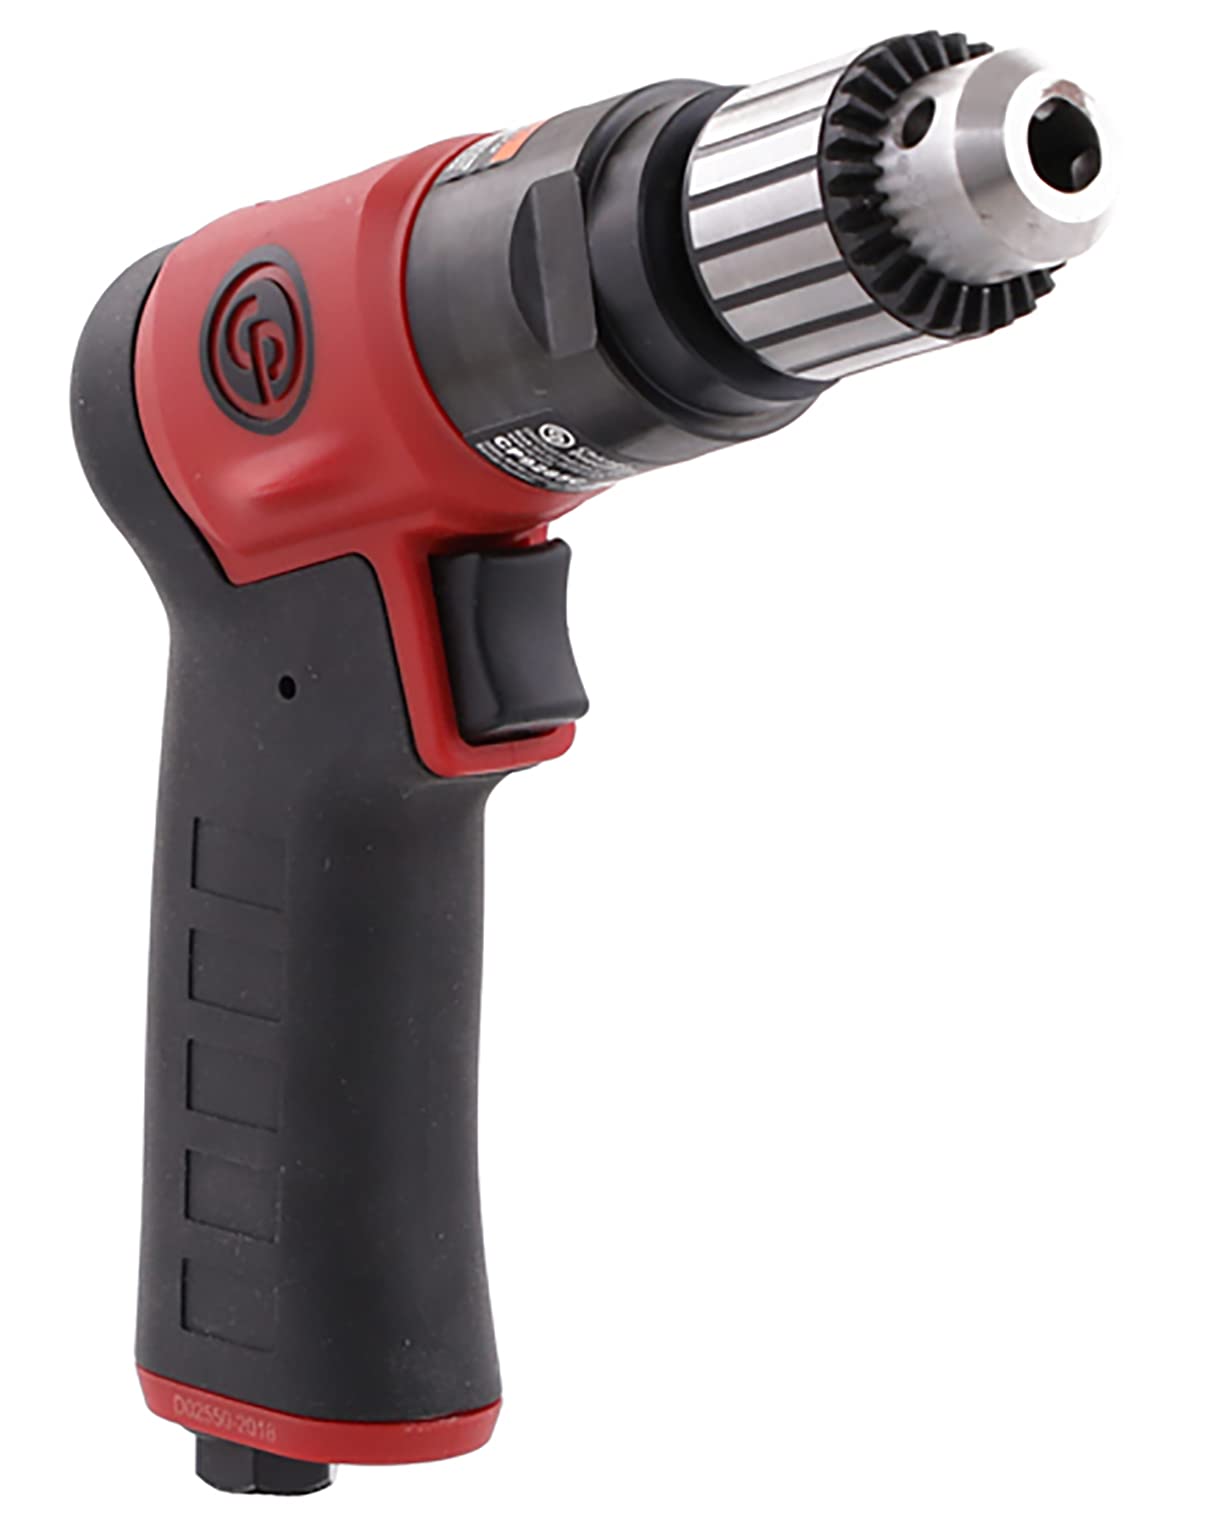 Chicago Pneumatic CP9285C - Air Power Drill, Hand Drill, Power Tools & Home Improvement, 3/8 Inch (10 mm), Keyed Chuck, Pistol Handle, 0.62 HP / 460 W, Stall Torque 4.1 ft. lbf / 5.5 Nm - 3000 RPM